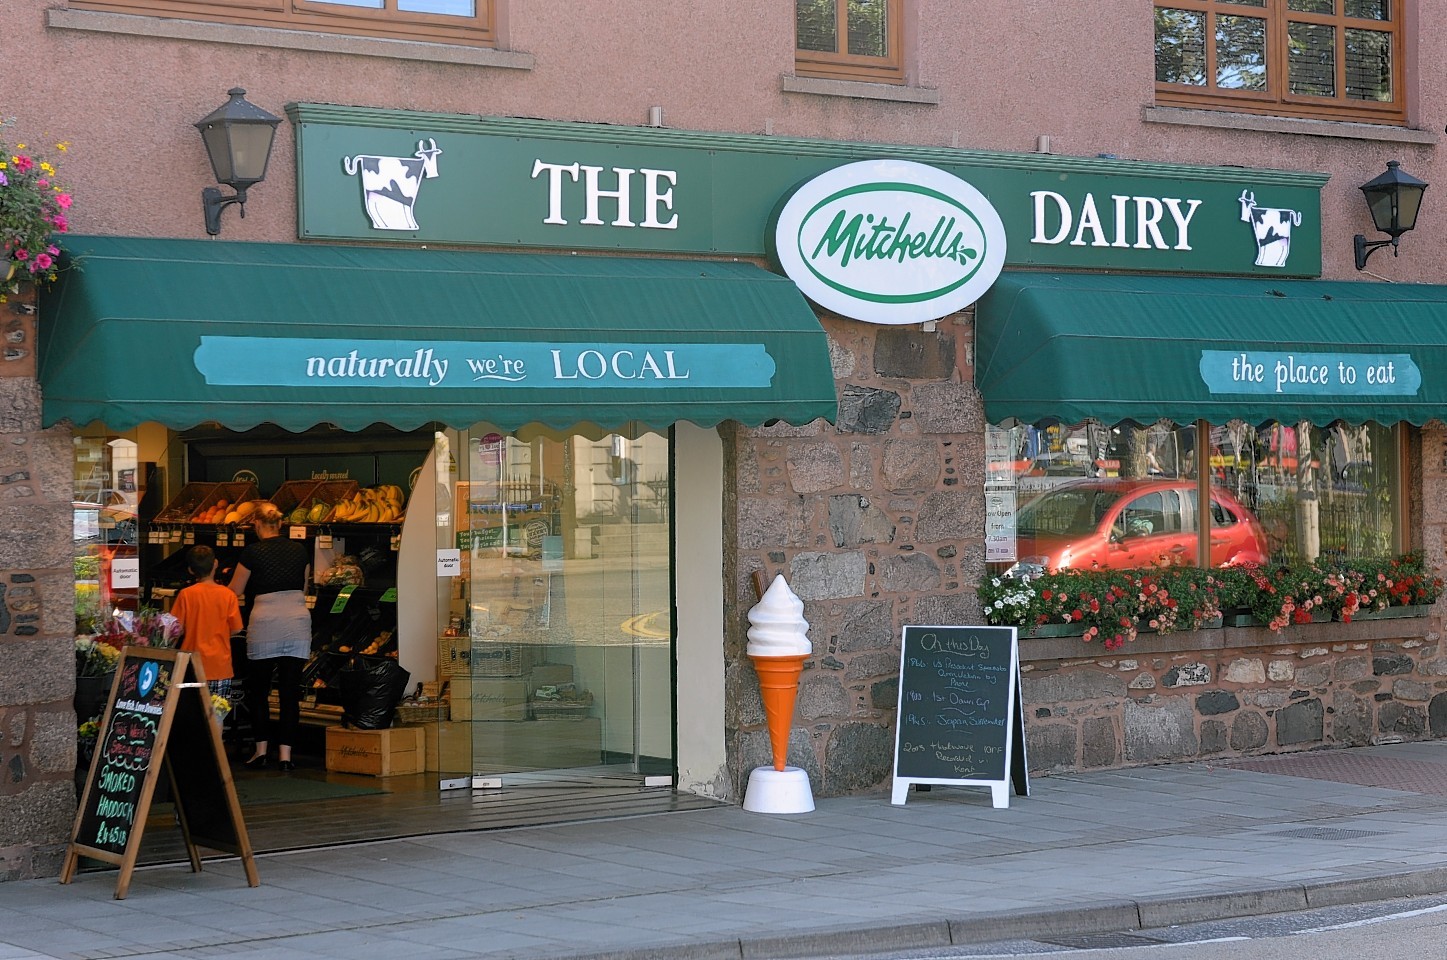 Mitchells Dairy, Inverurie before it closed its doors in 2017.